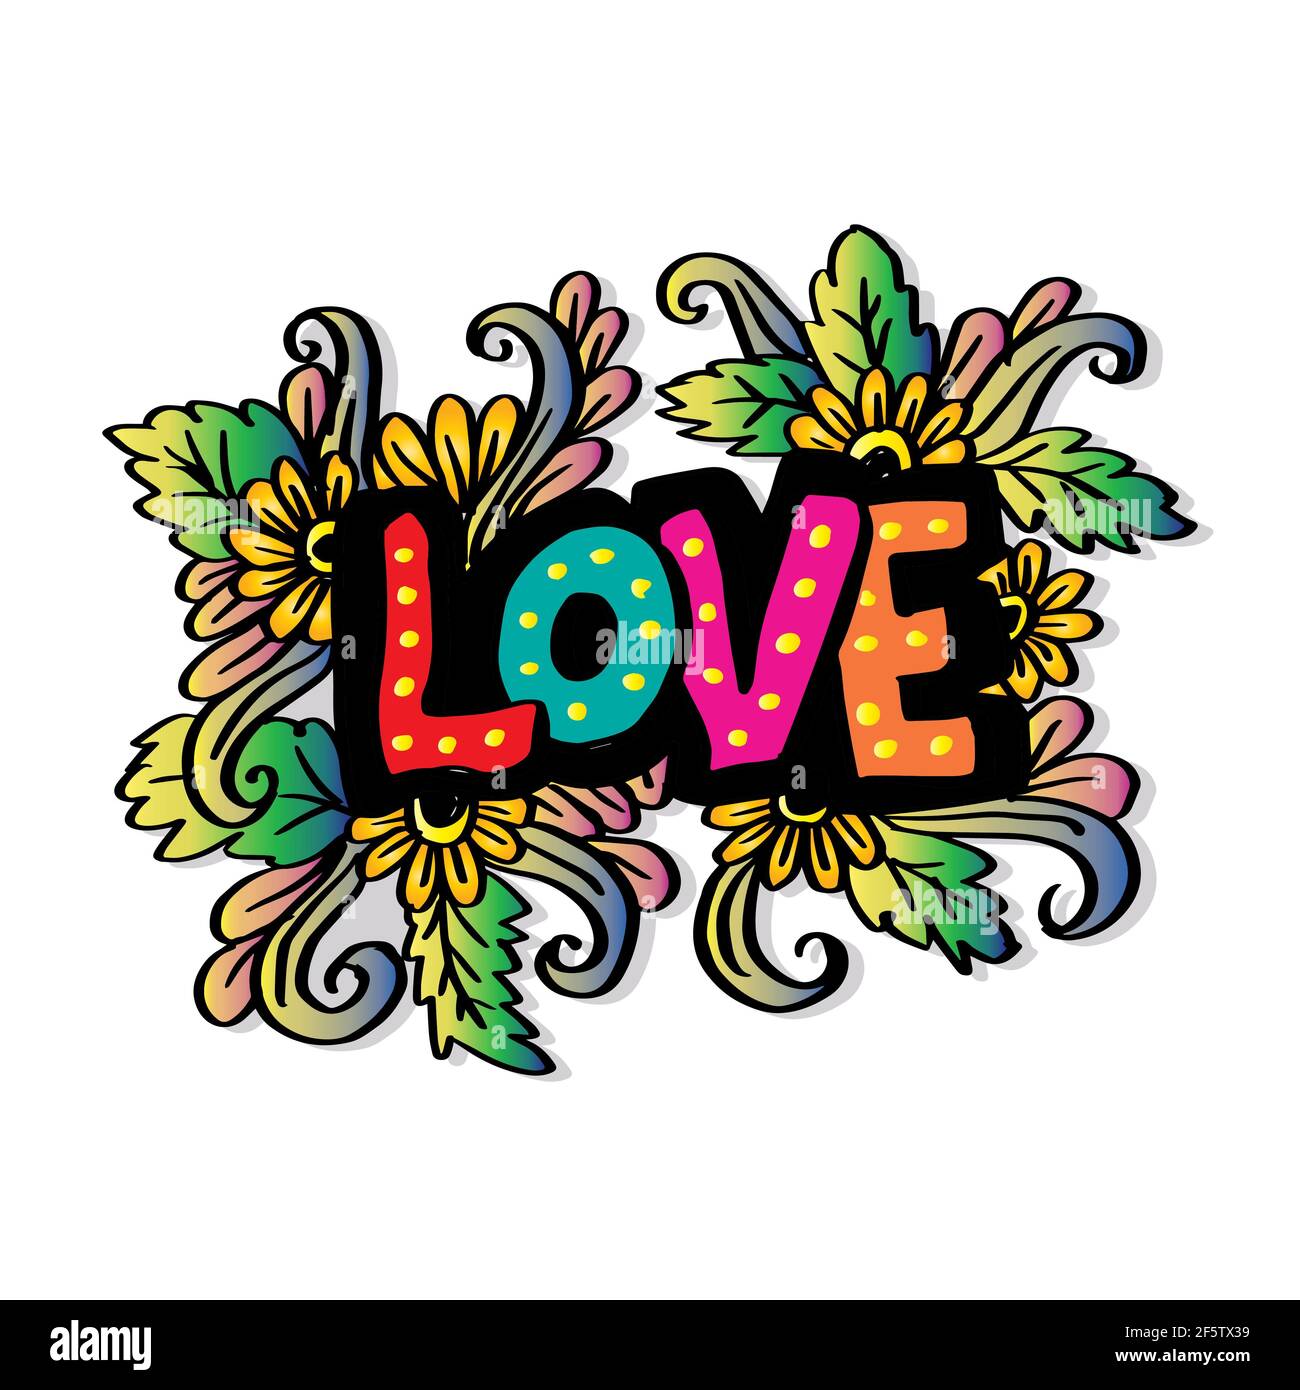 LOVE text hand drawing illustration with floral background Stock ...